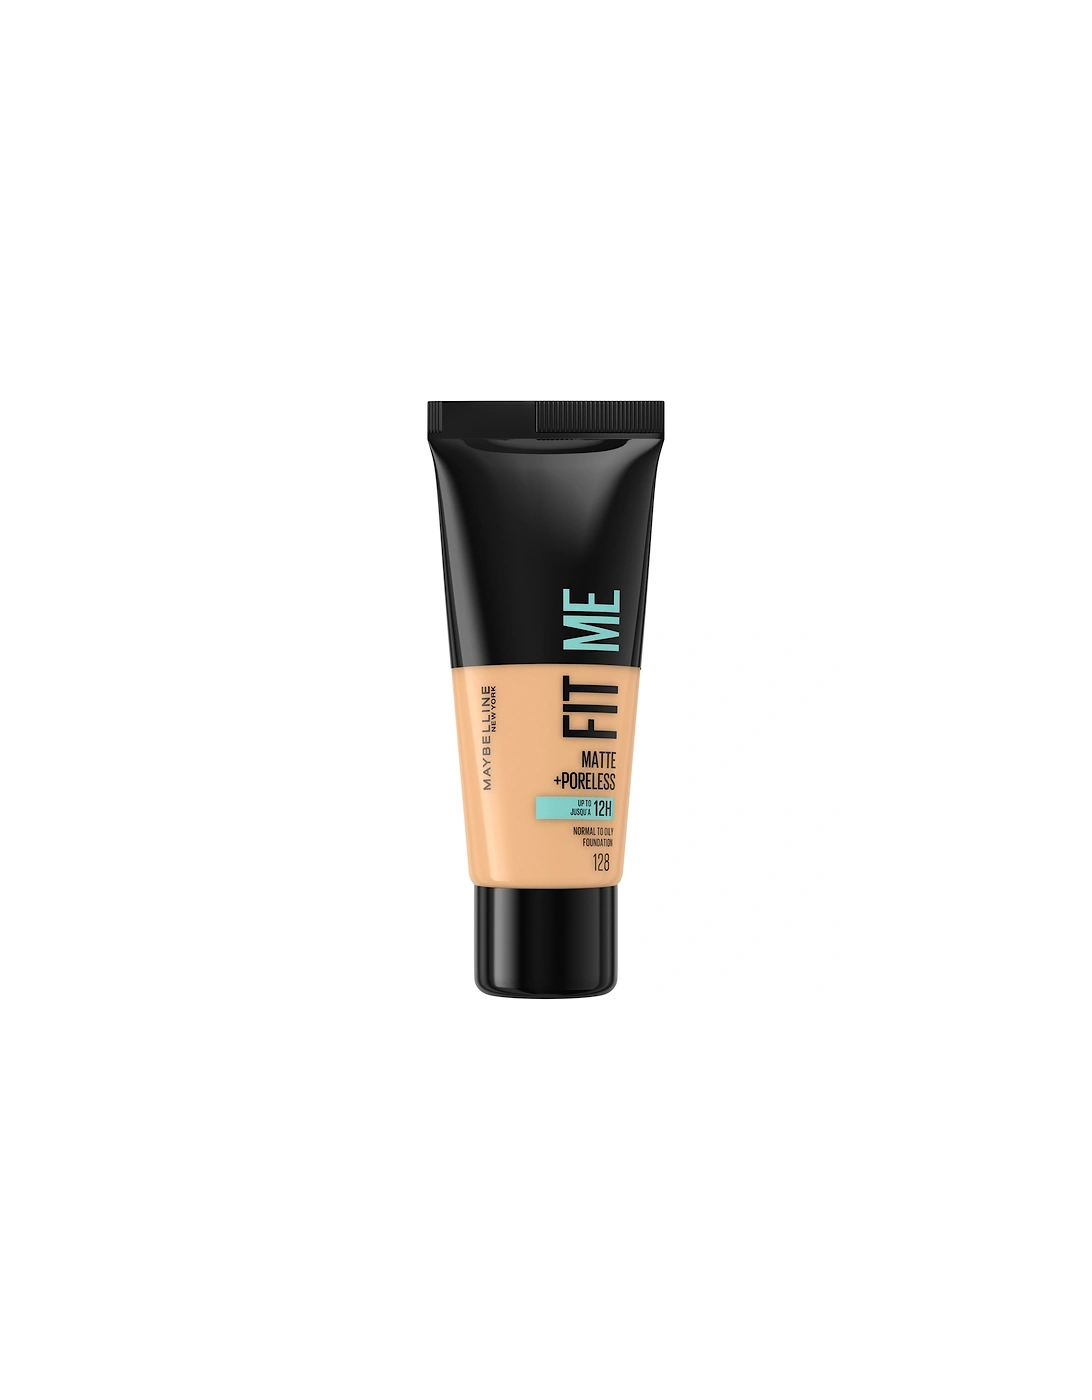 Fit Me! Matte and Poreless Foundation - 128 Warm Nude - - Fit Me! Matte and Poreless Foundation 30ml (Various Shades) - Foundation - Fit Me! Matte and Poreless Foundation 30ml (Various Shades) - Tina - Fit Me! Matte and Poreless Foundation 30ml (Various Shades) - Jo, 2 of 1